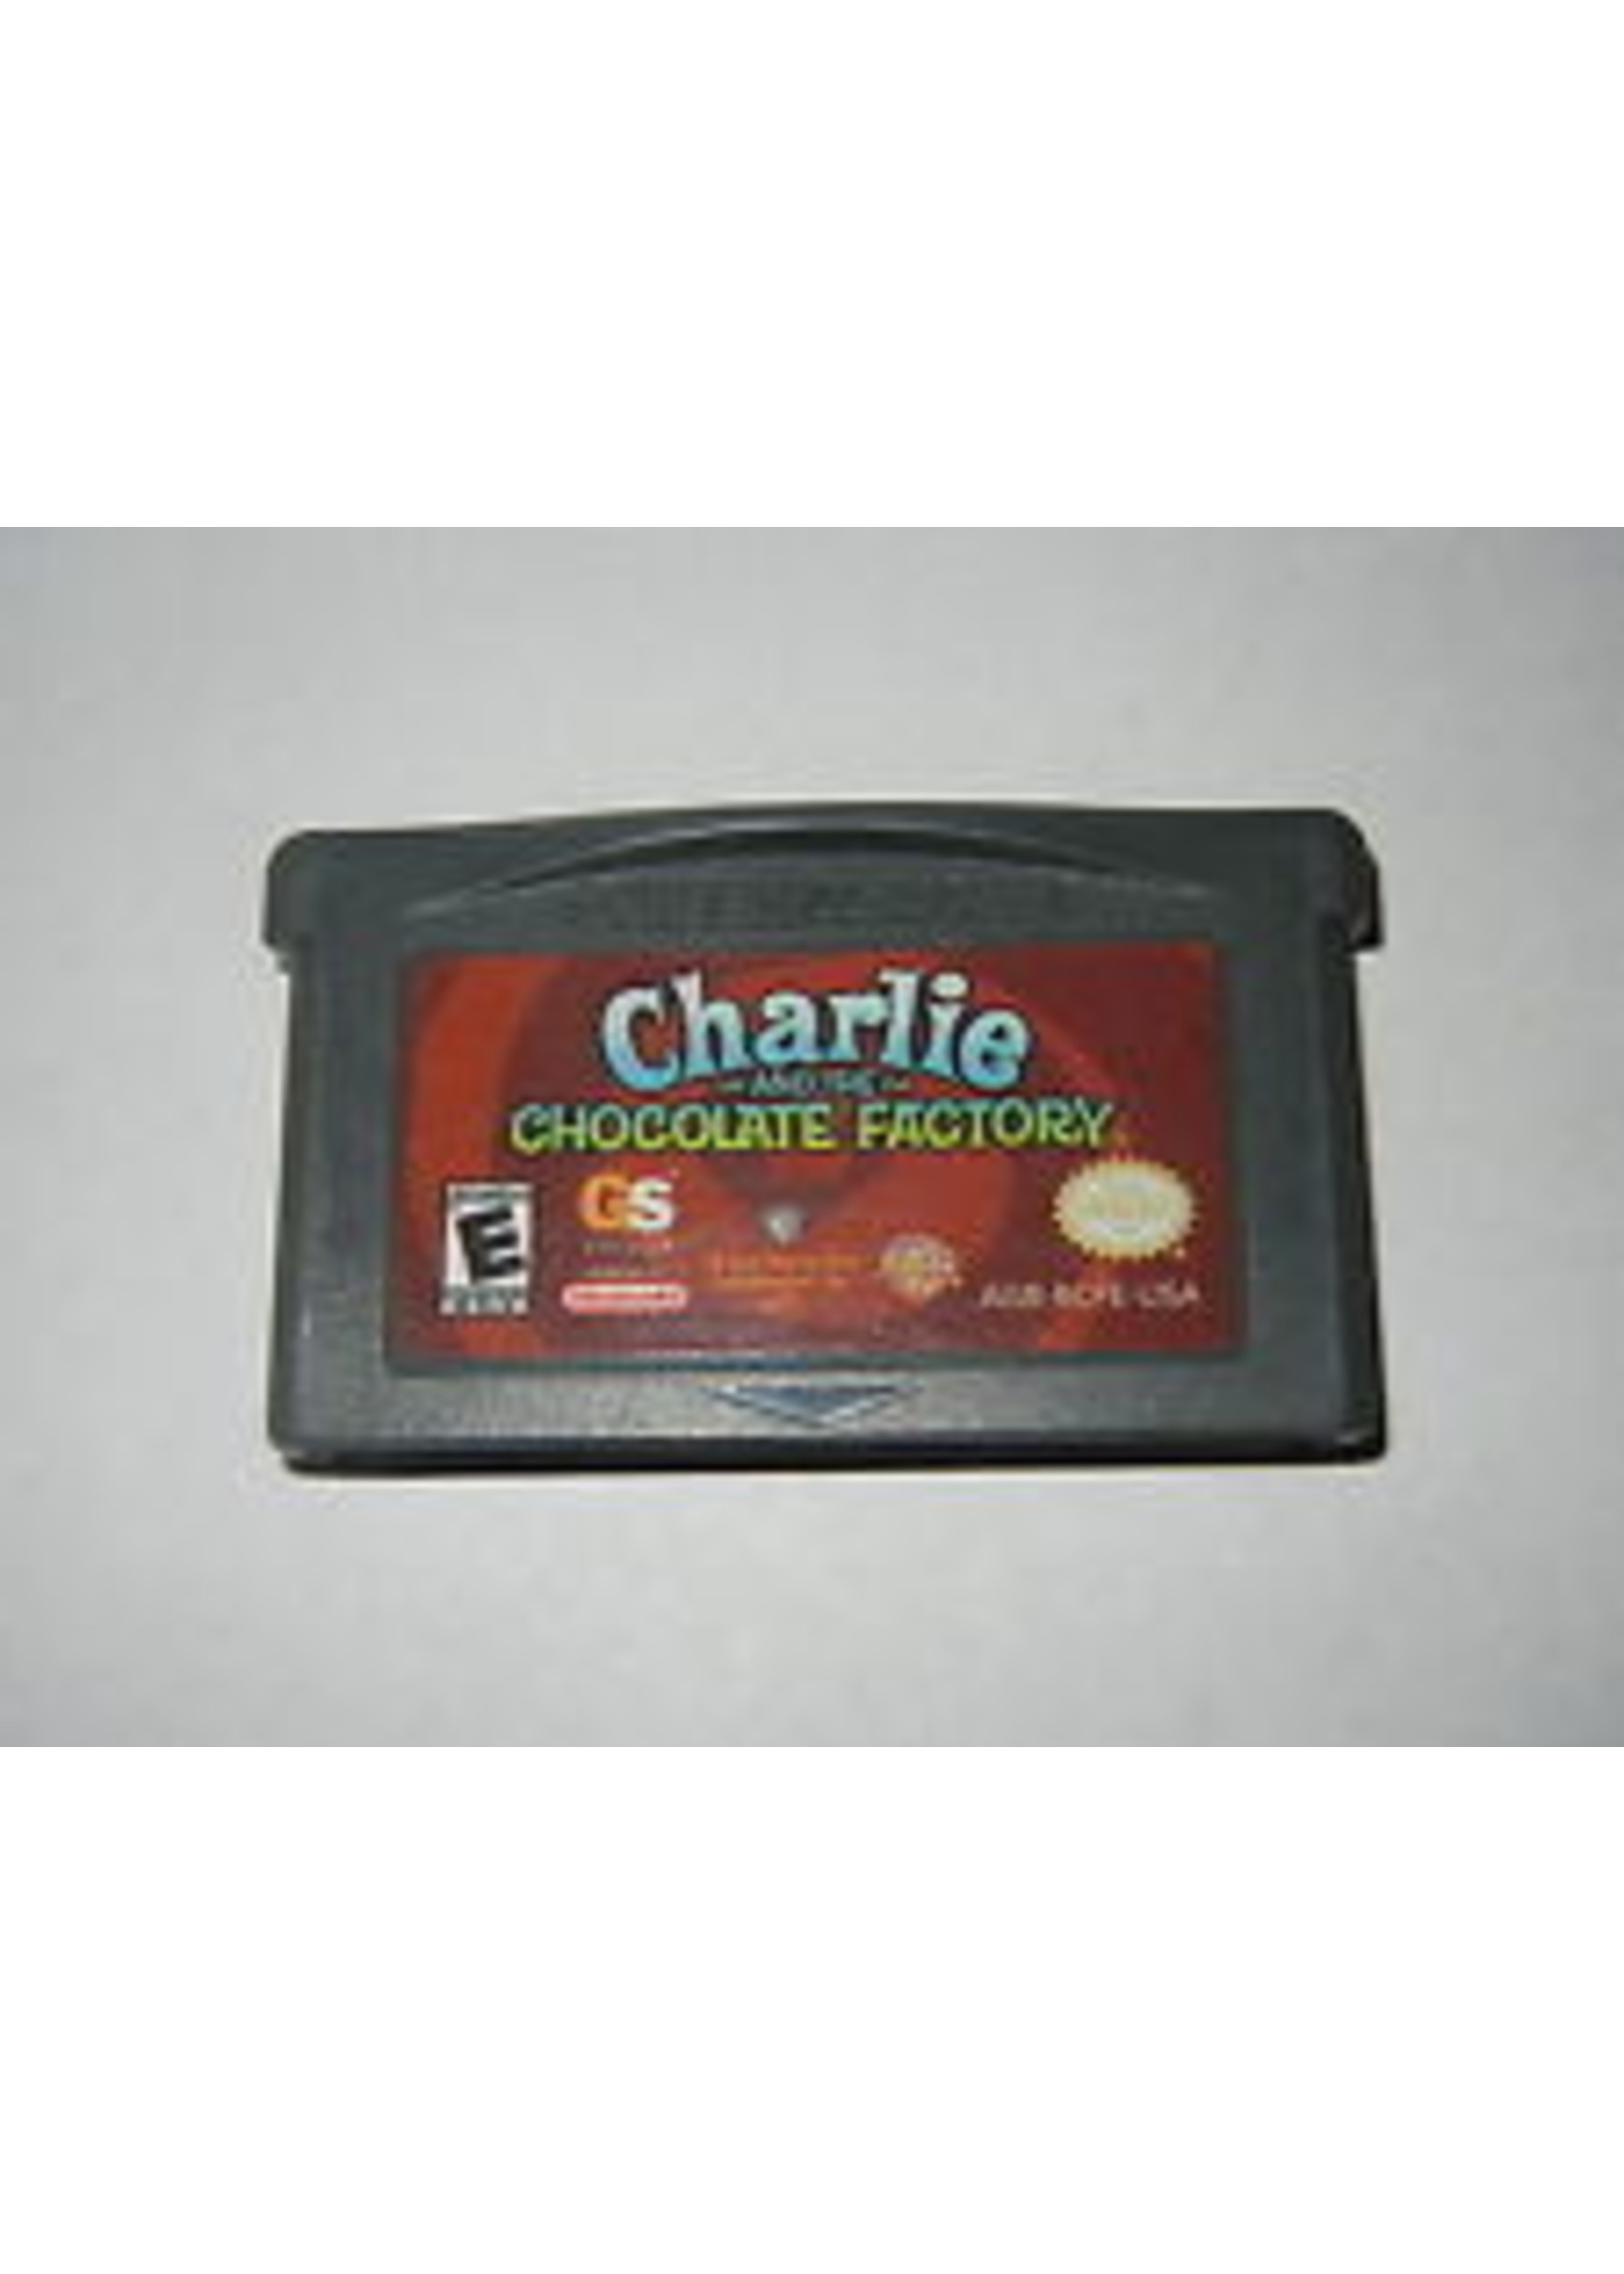 Nintendo Gameboy Advance Charlie and the Chocolate Factory